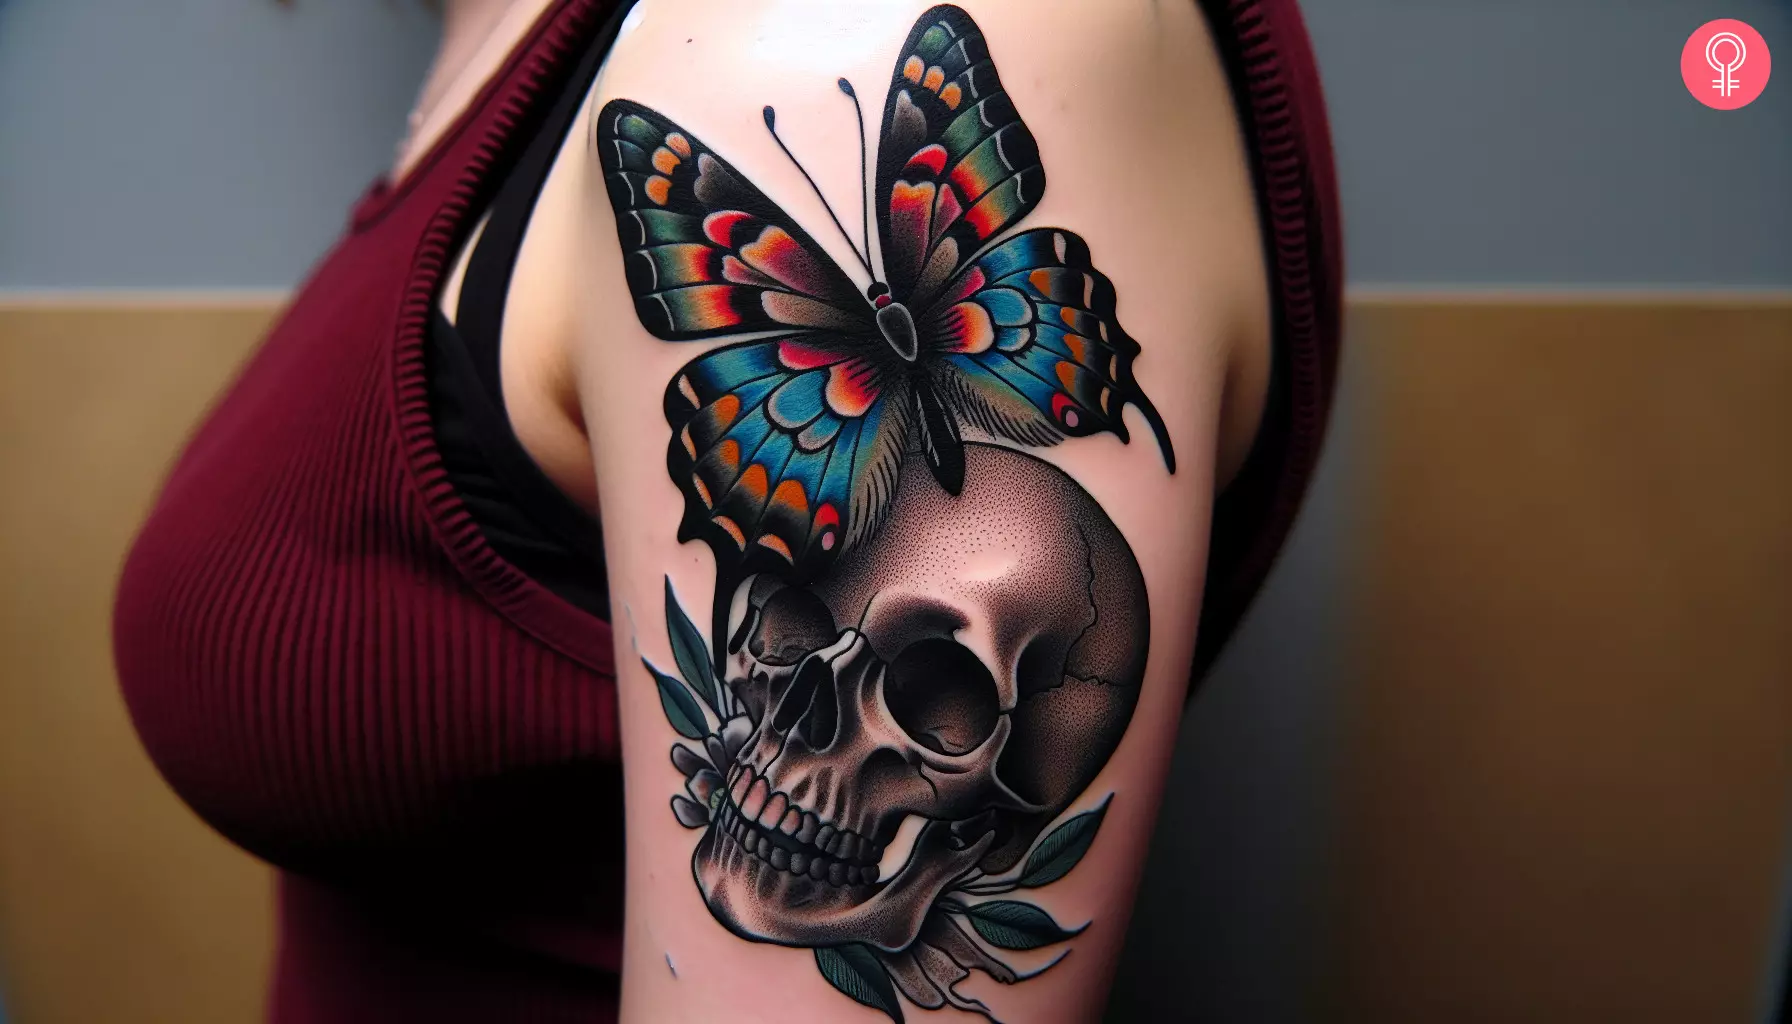 Woman with butterfly and skull tattoo on her arm